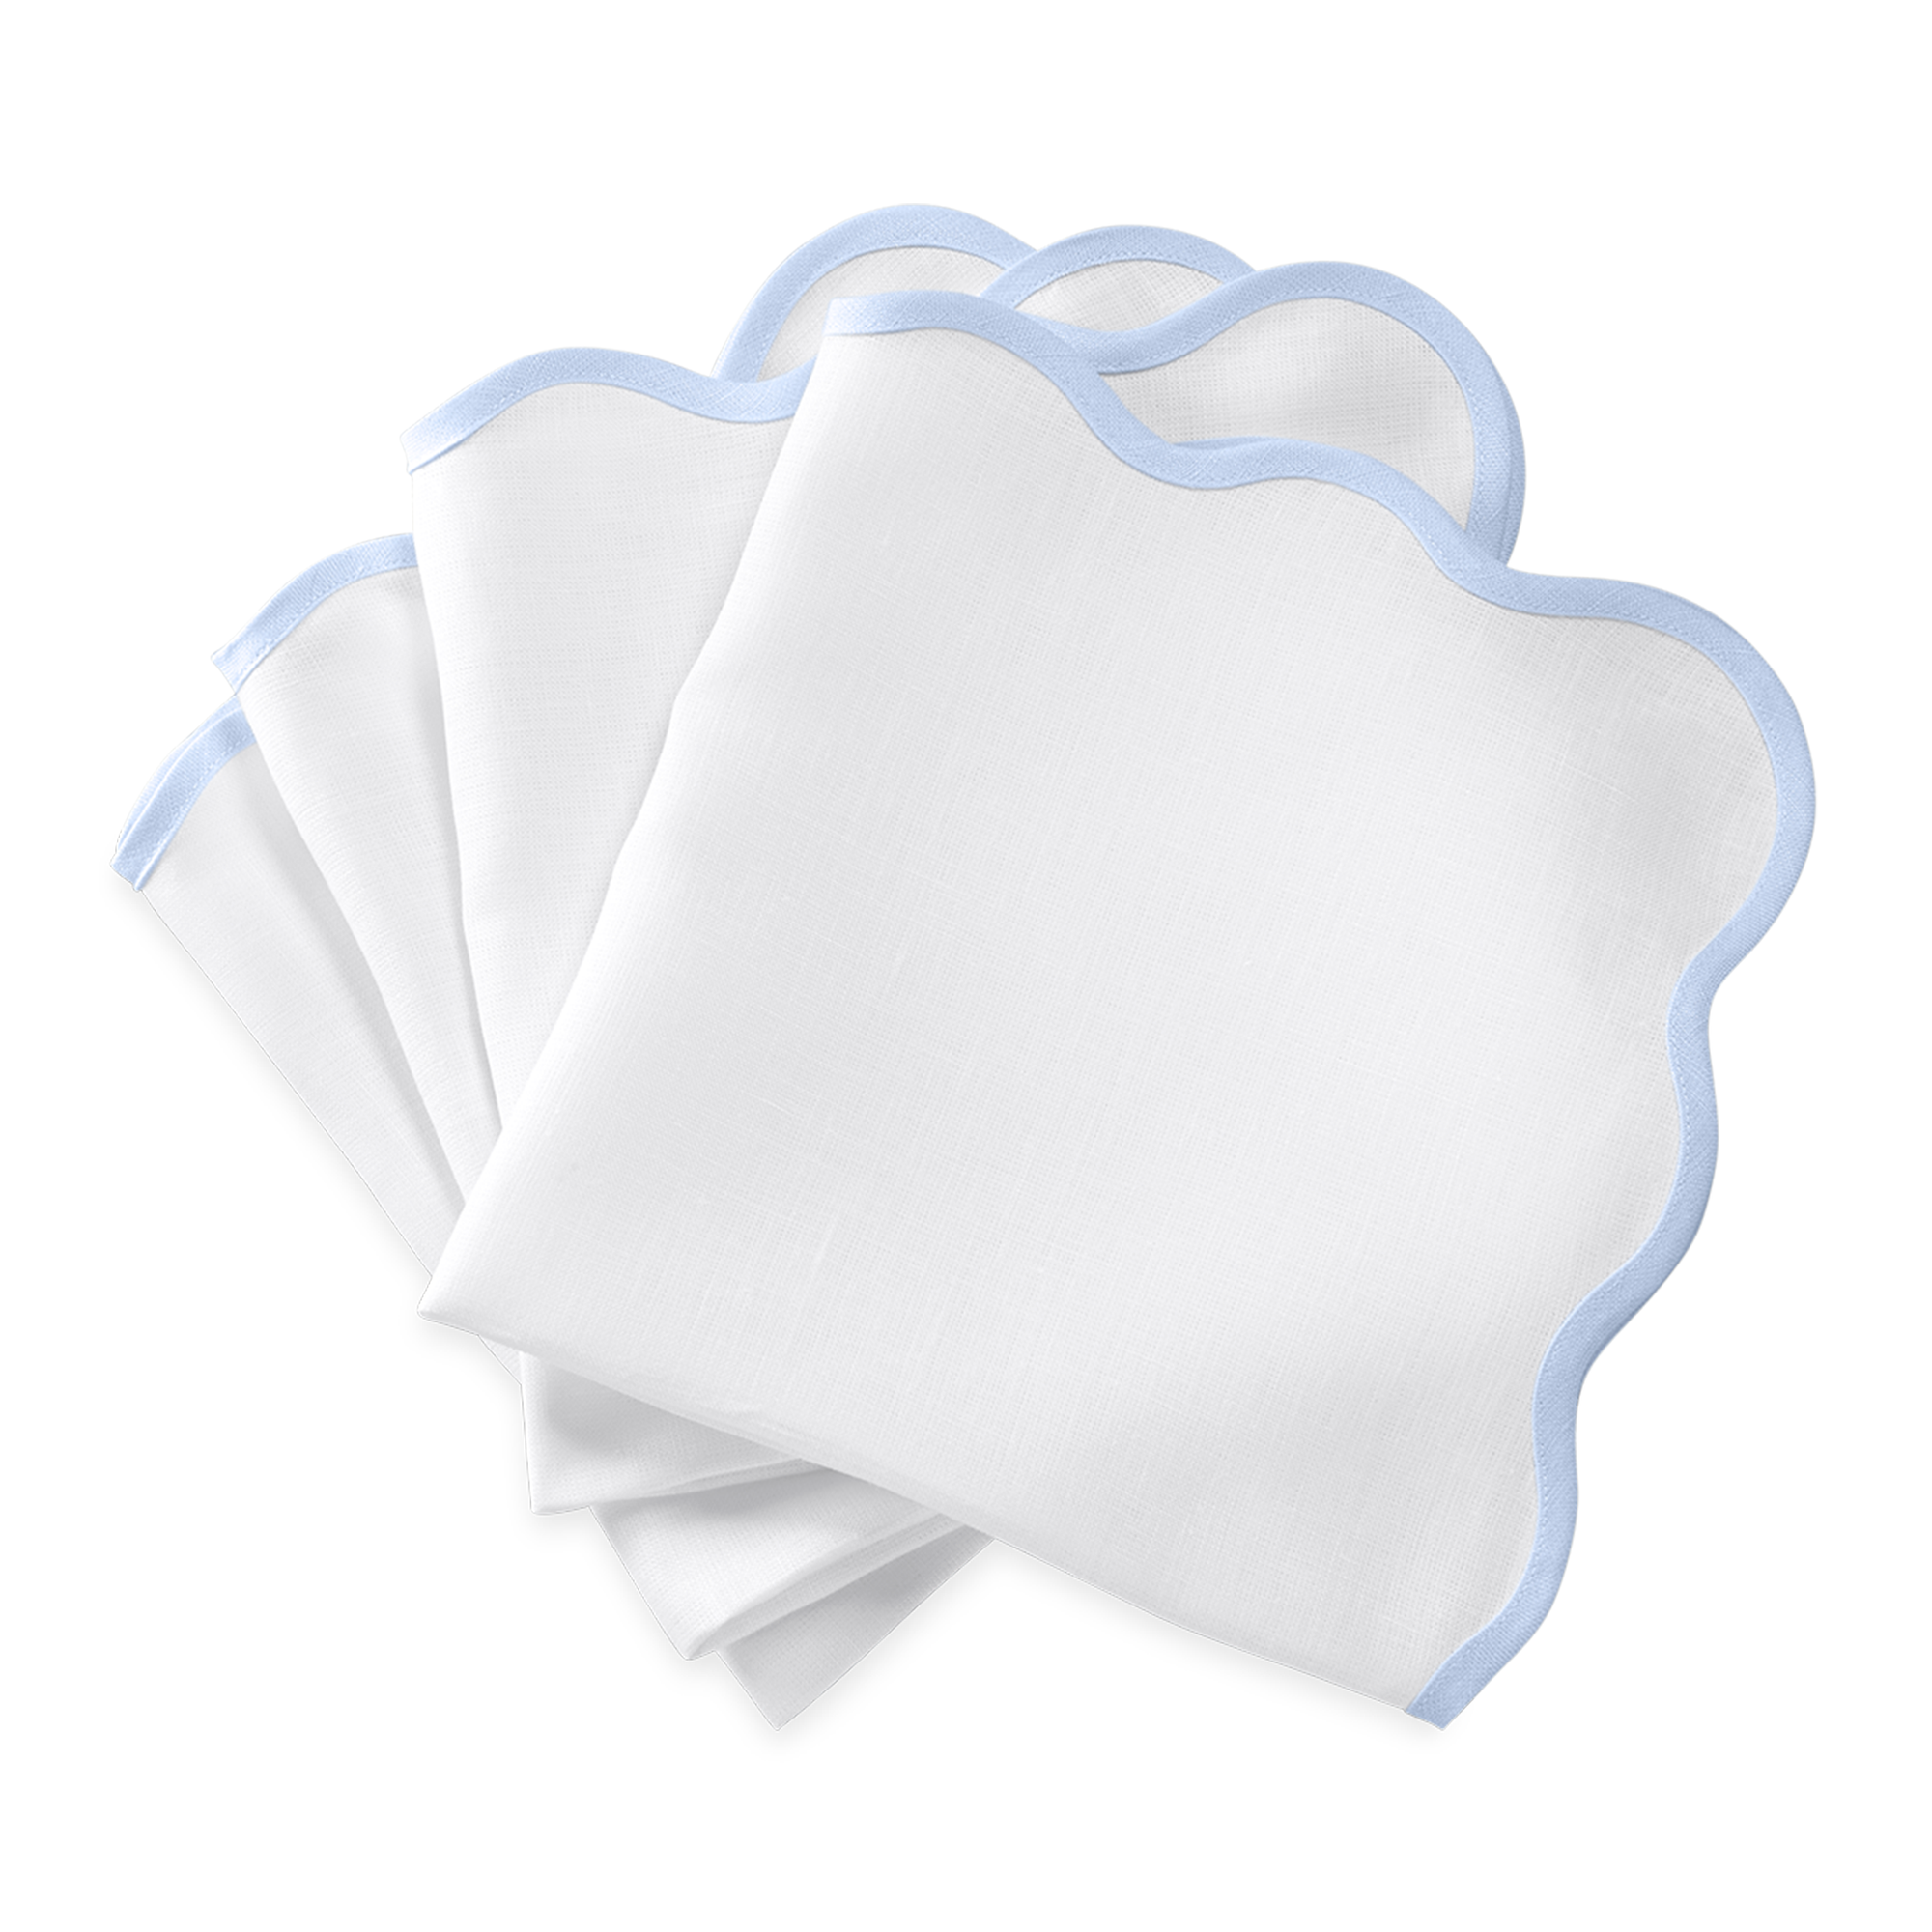 Dinner Napkins of Matouk Scallop Edge Table Linens in Color Ice Blue